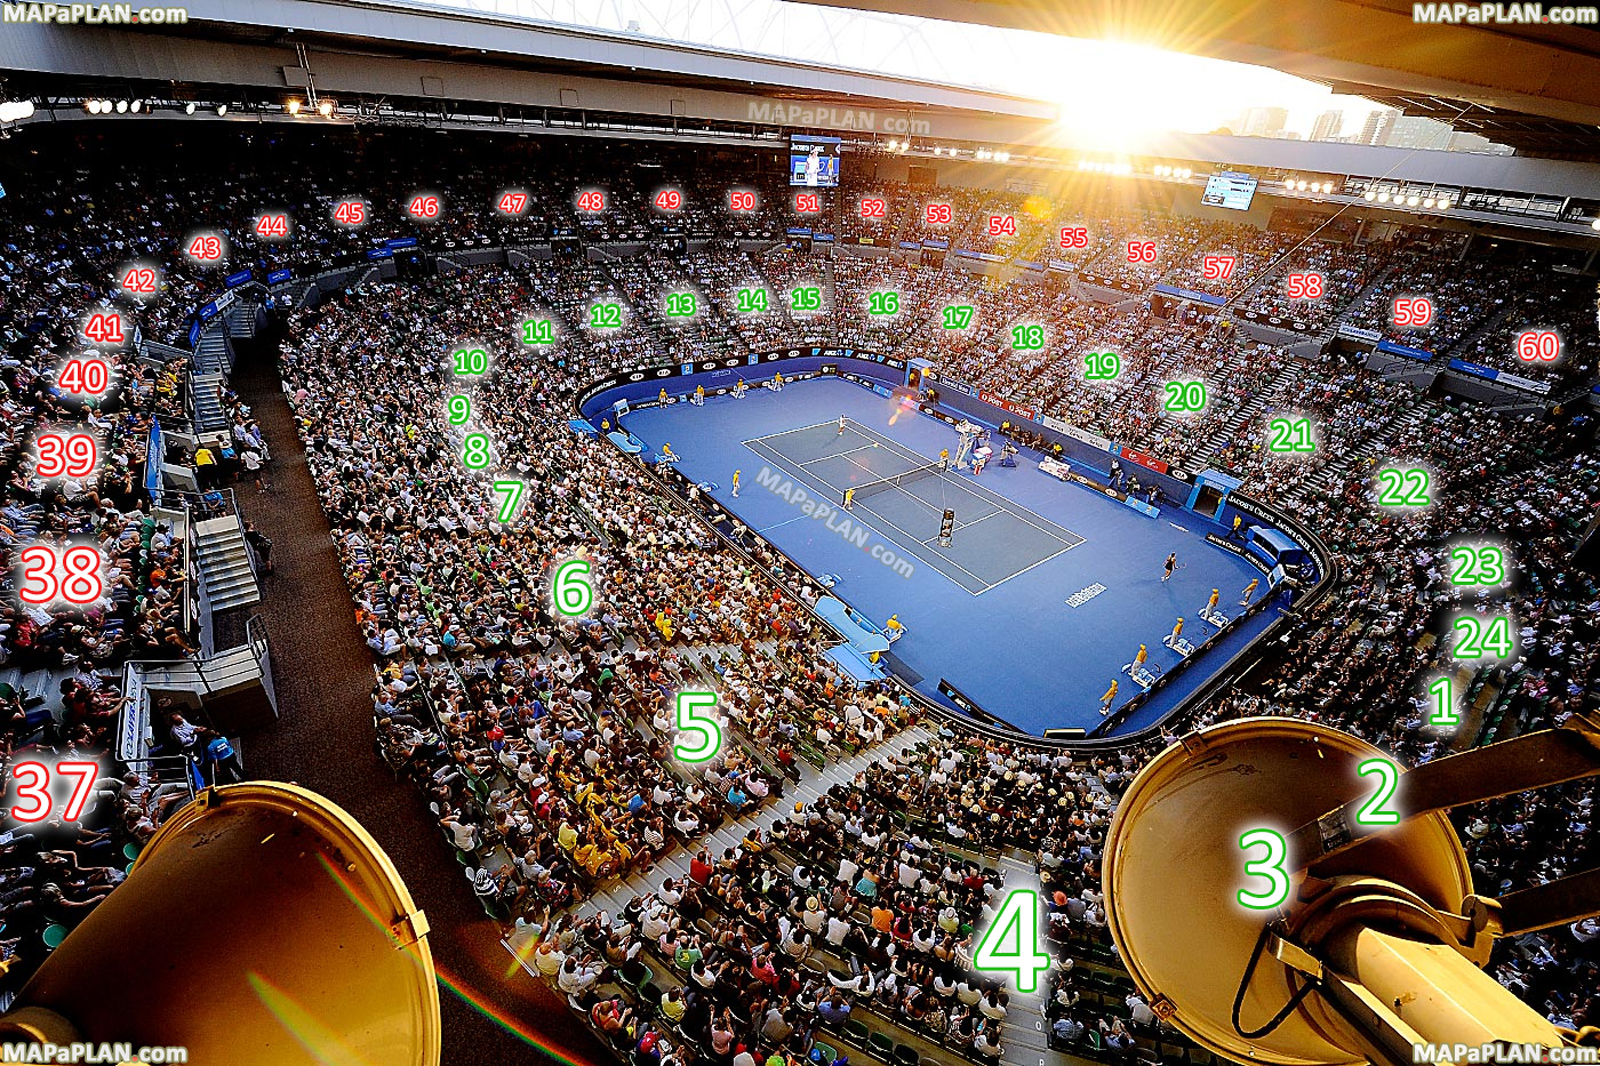 australian open tennis court corporate boxes side view good seats diagram guide Melbourne Rod Laver Arena seating plan